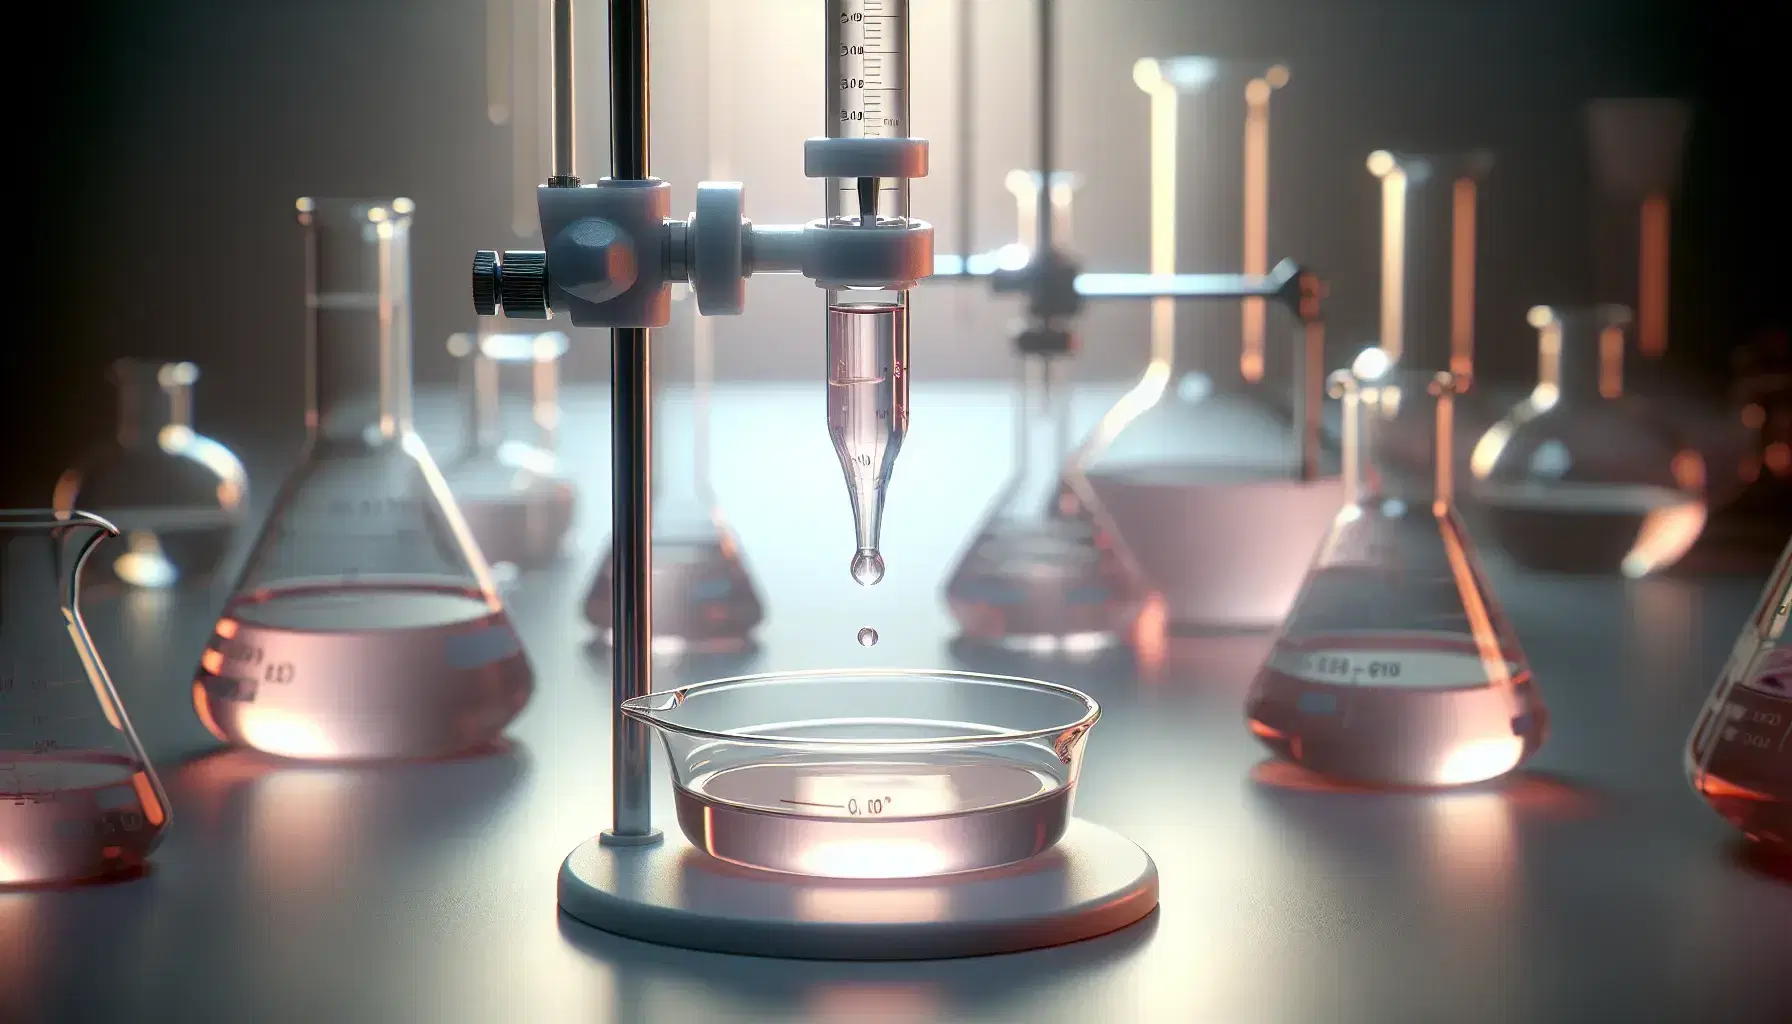 Chemical laboratory with glass burette containing pink solution dripping into titration dish on blurred glassware background.